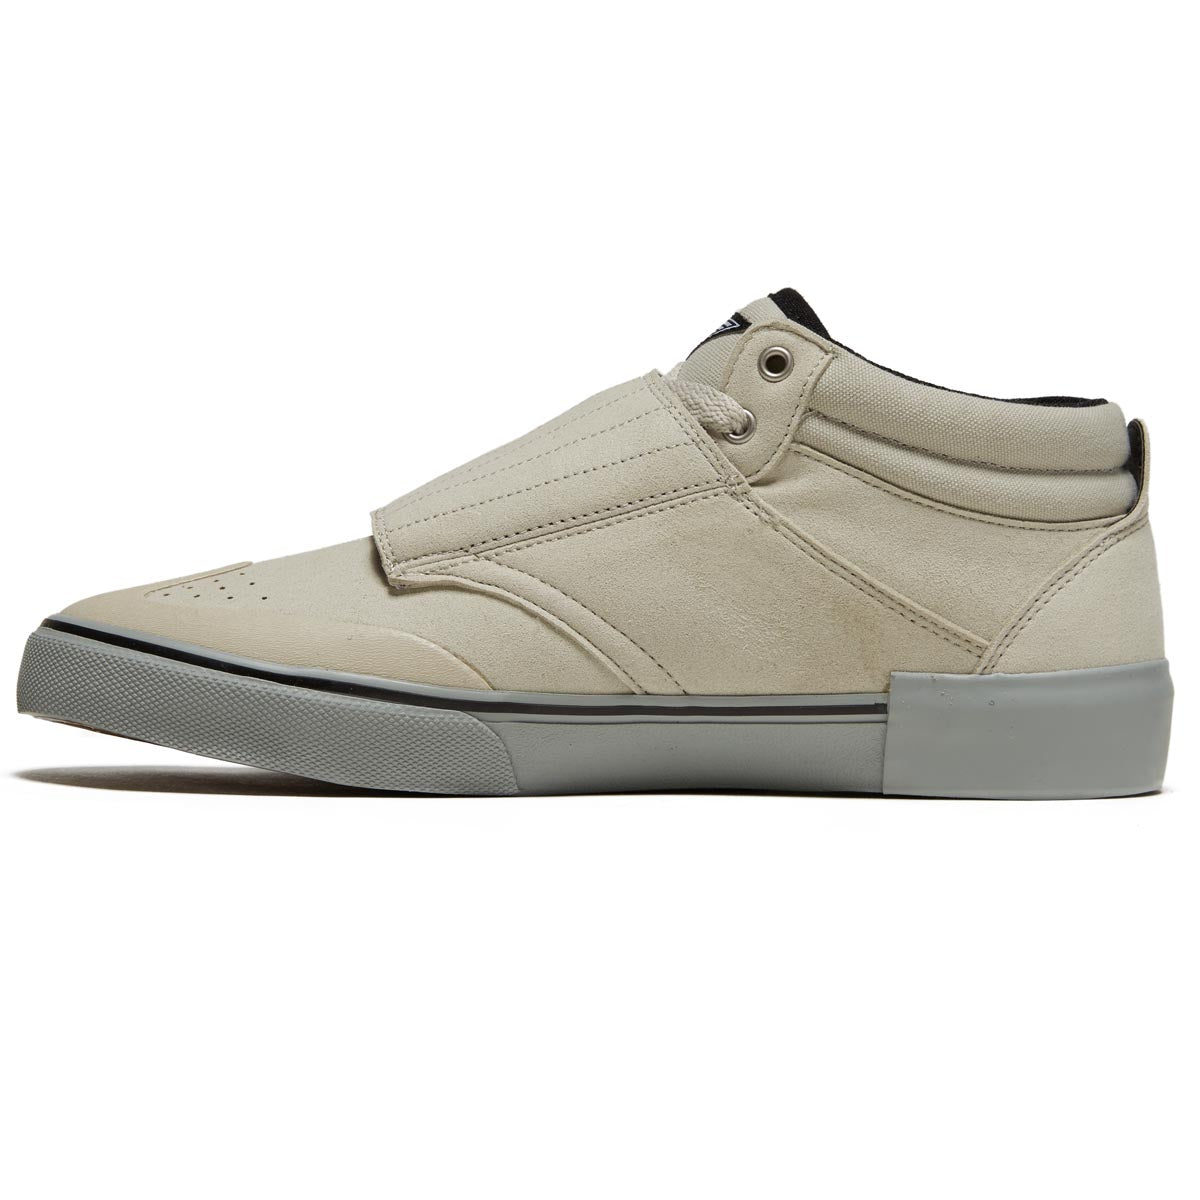 Etnies Andy Anderson Shoes - White/Grey image 2